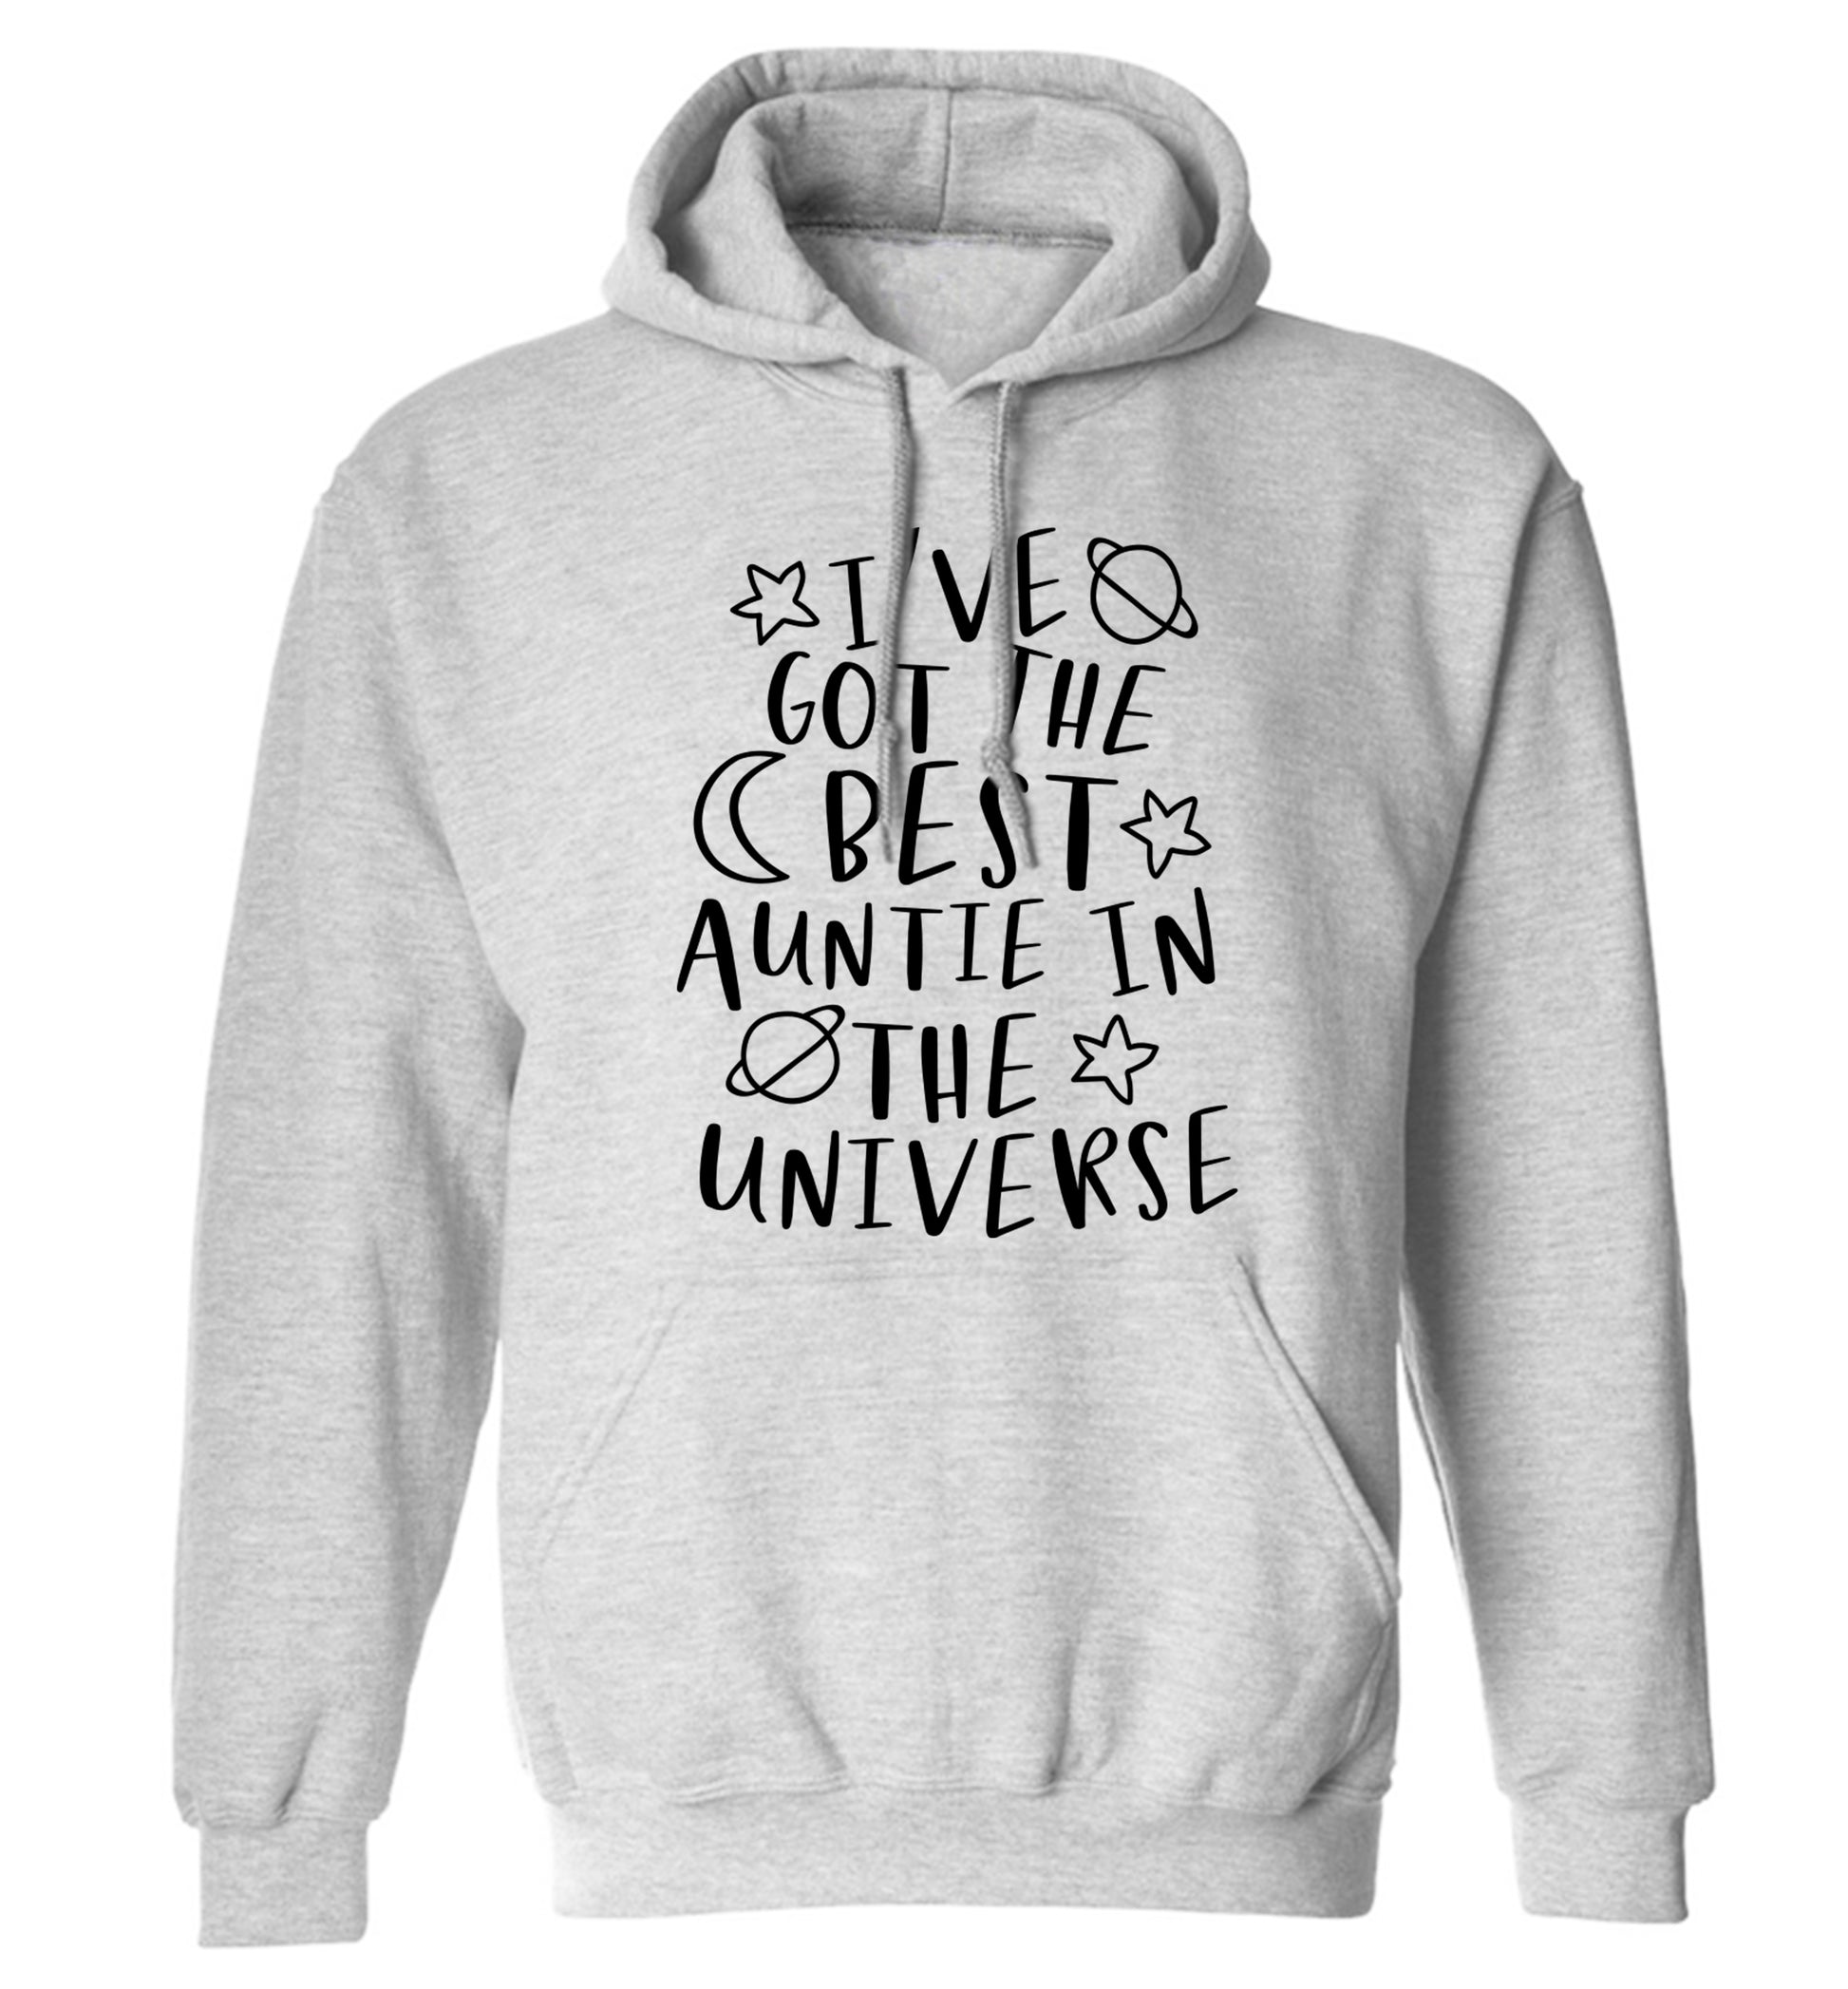 I've got the best auntie in the universe adults unisex grey hoodie 2XL